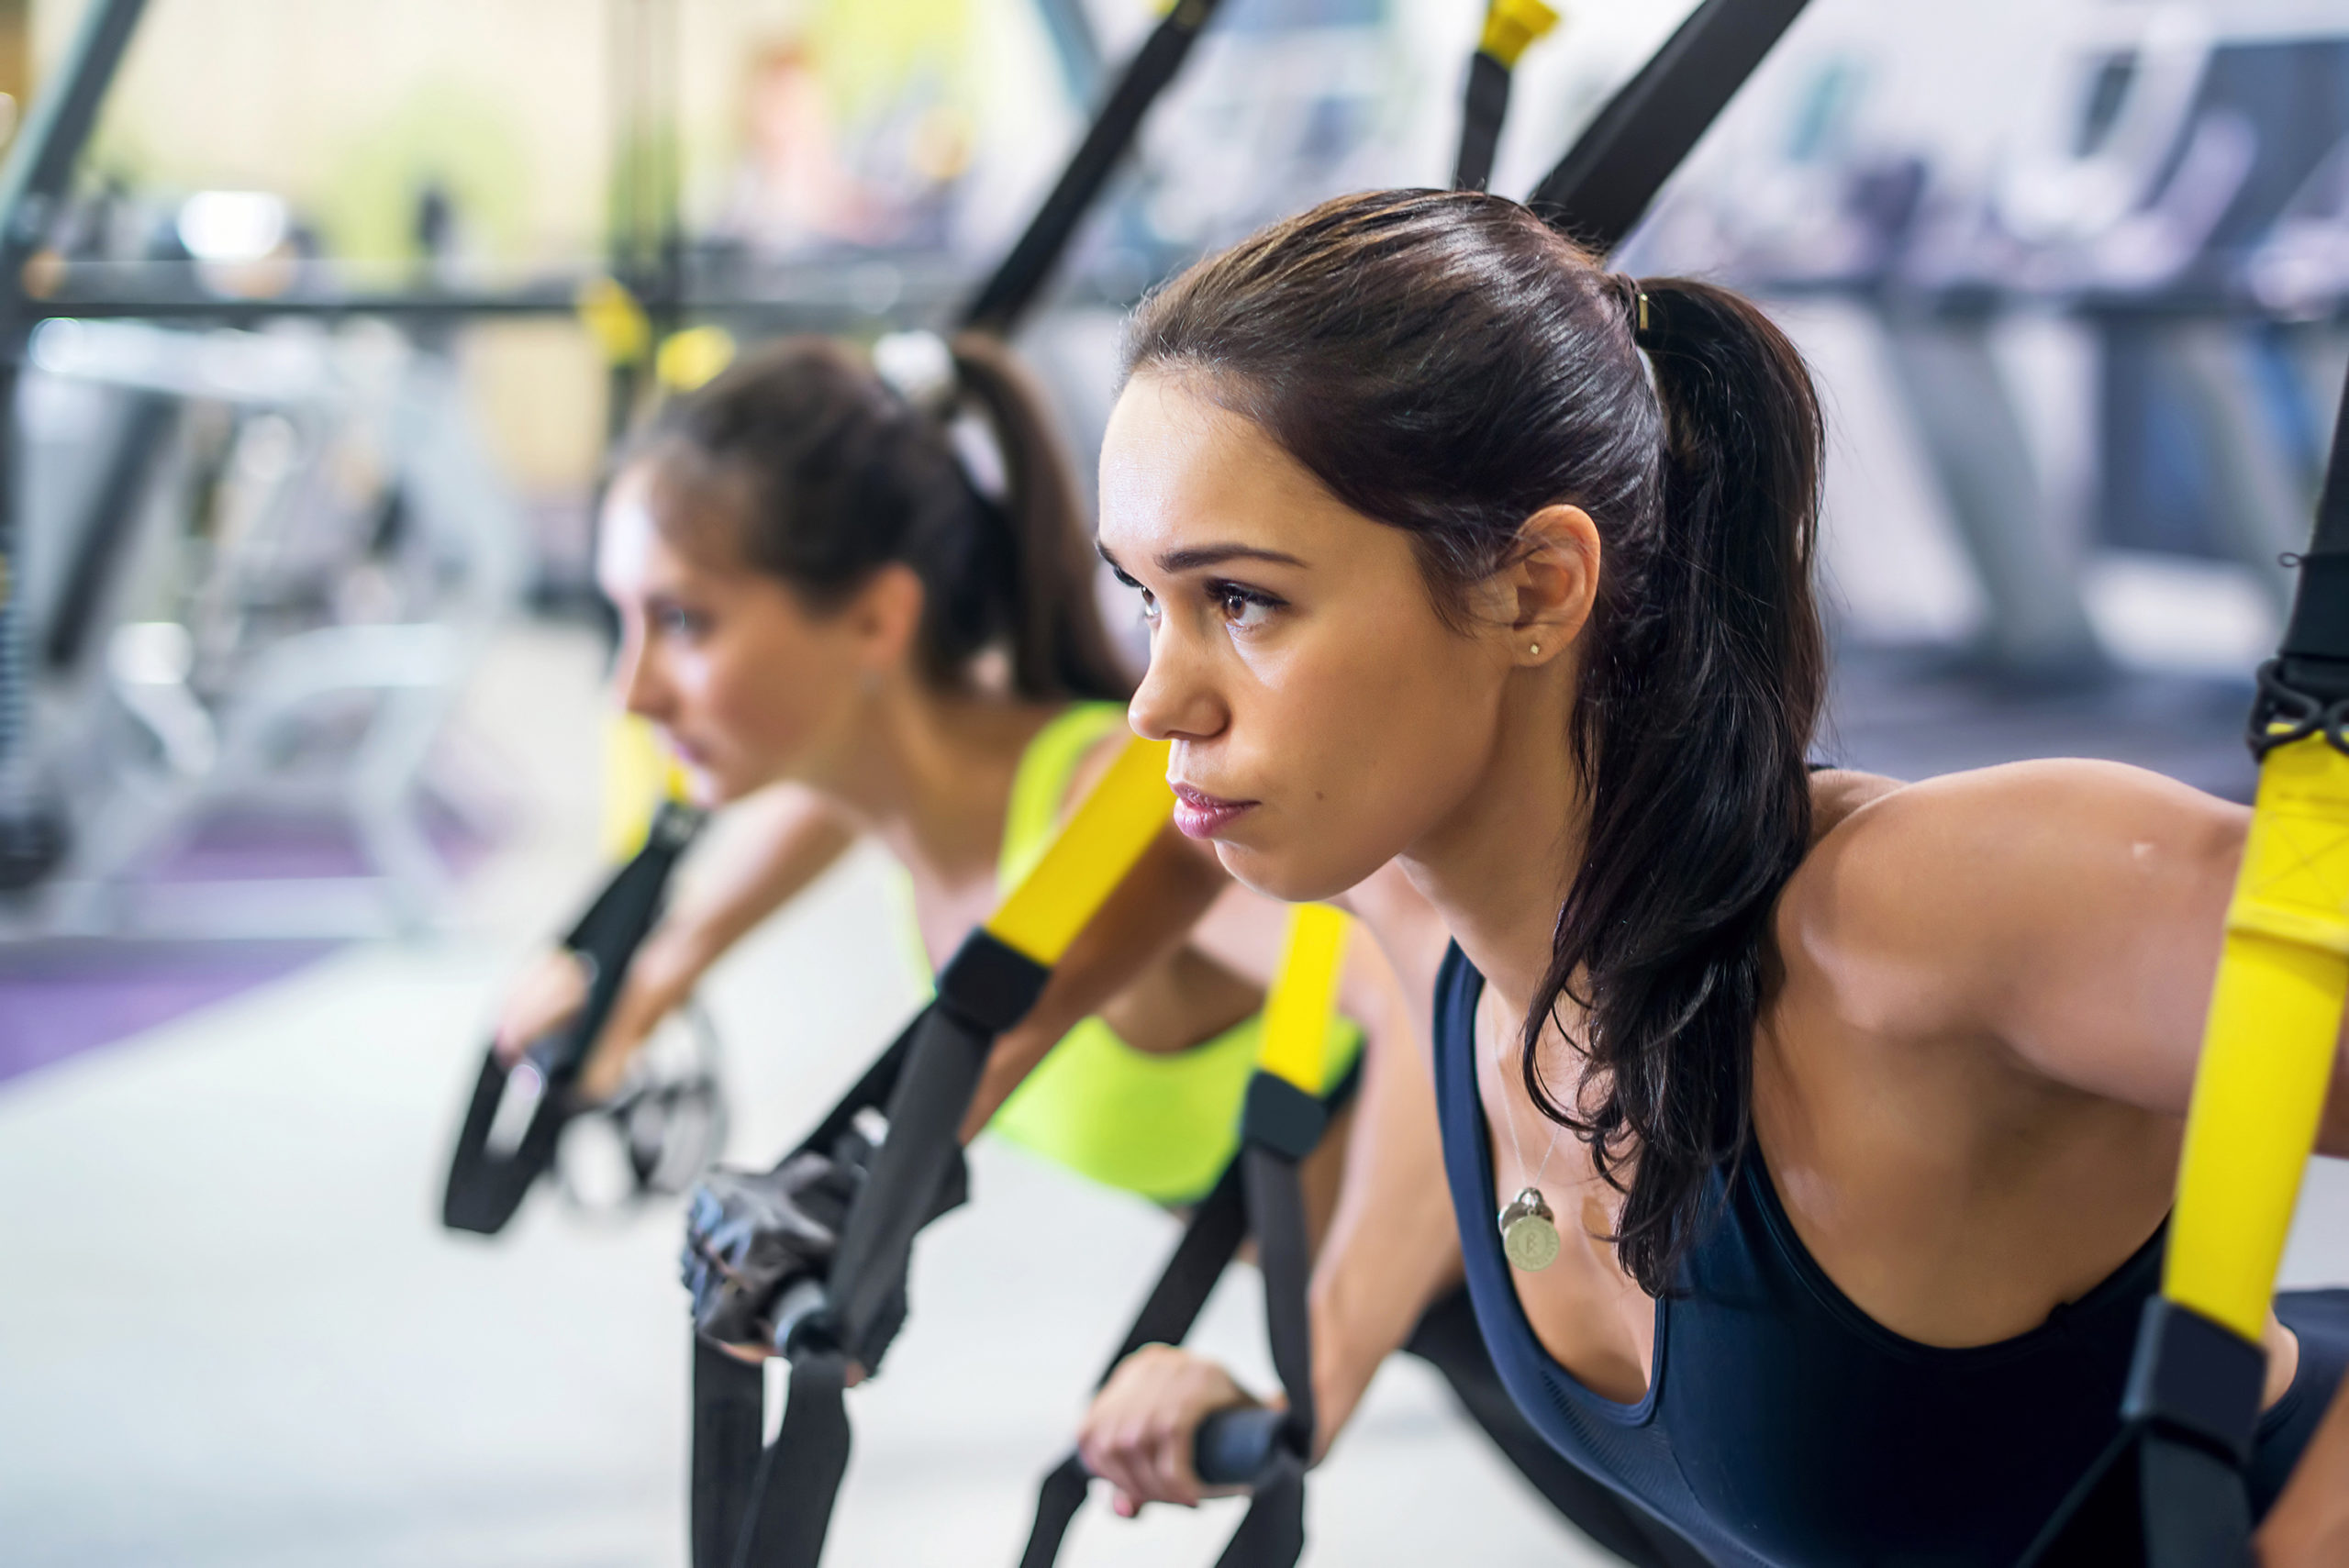 4 Reasons to Choose a Group Fitness Program